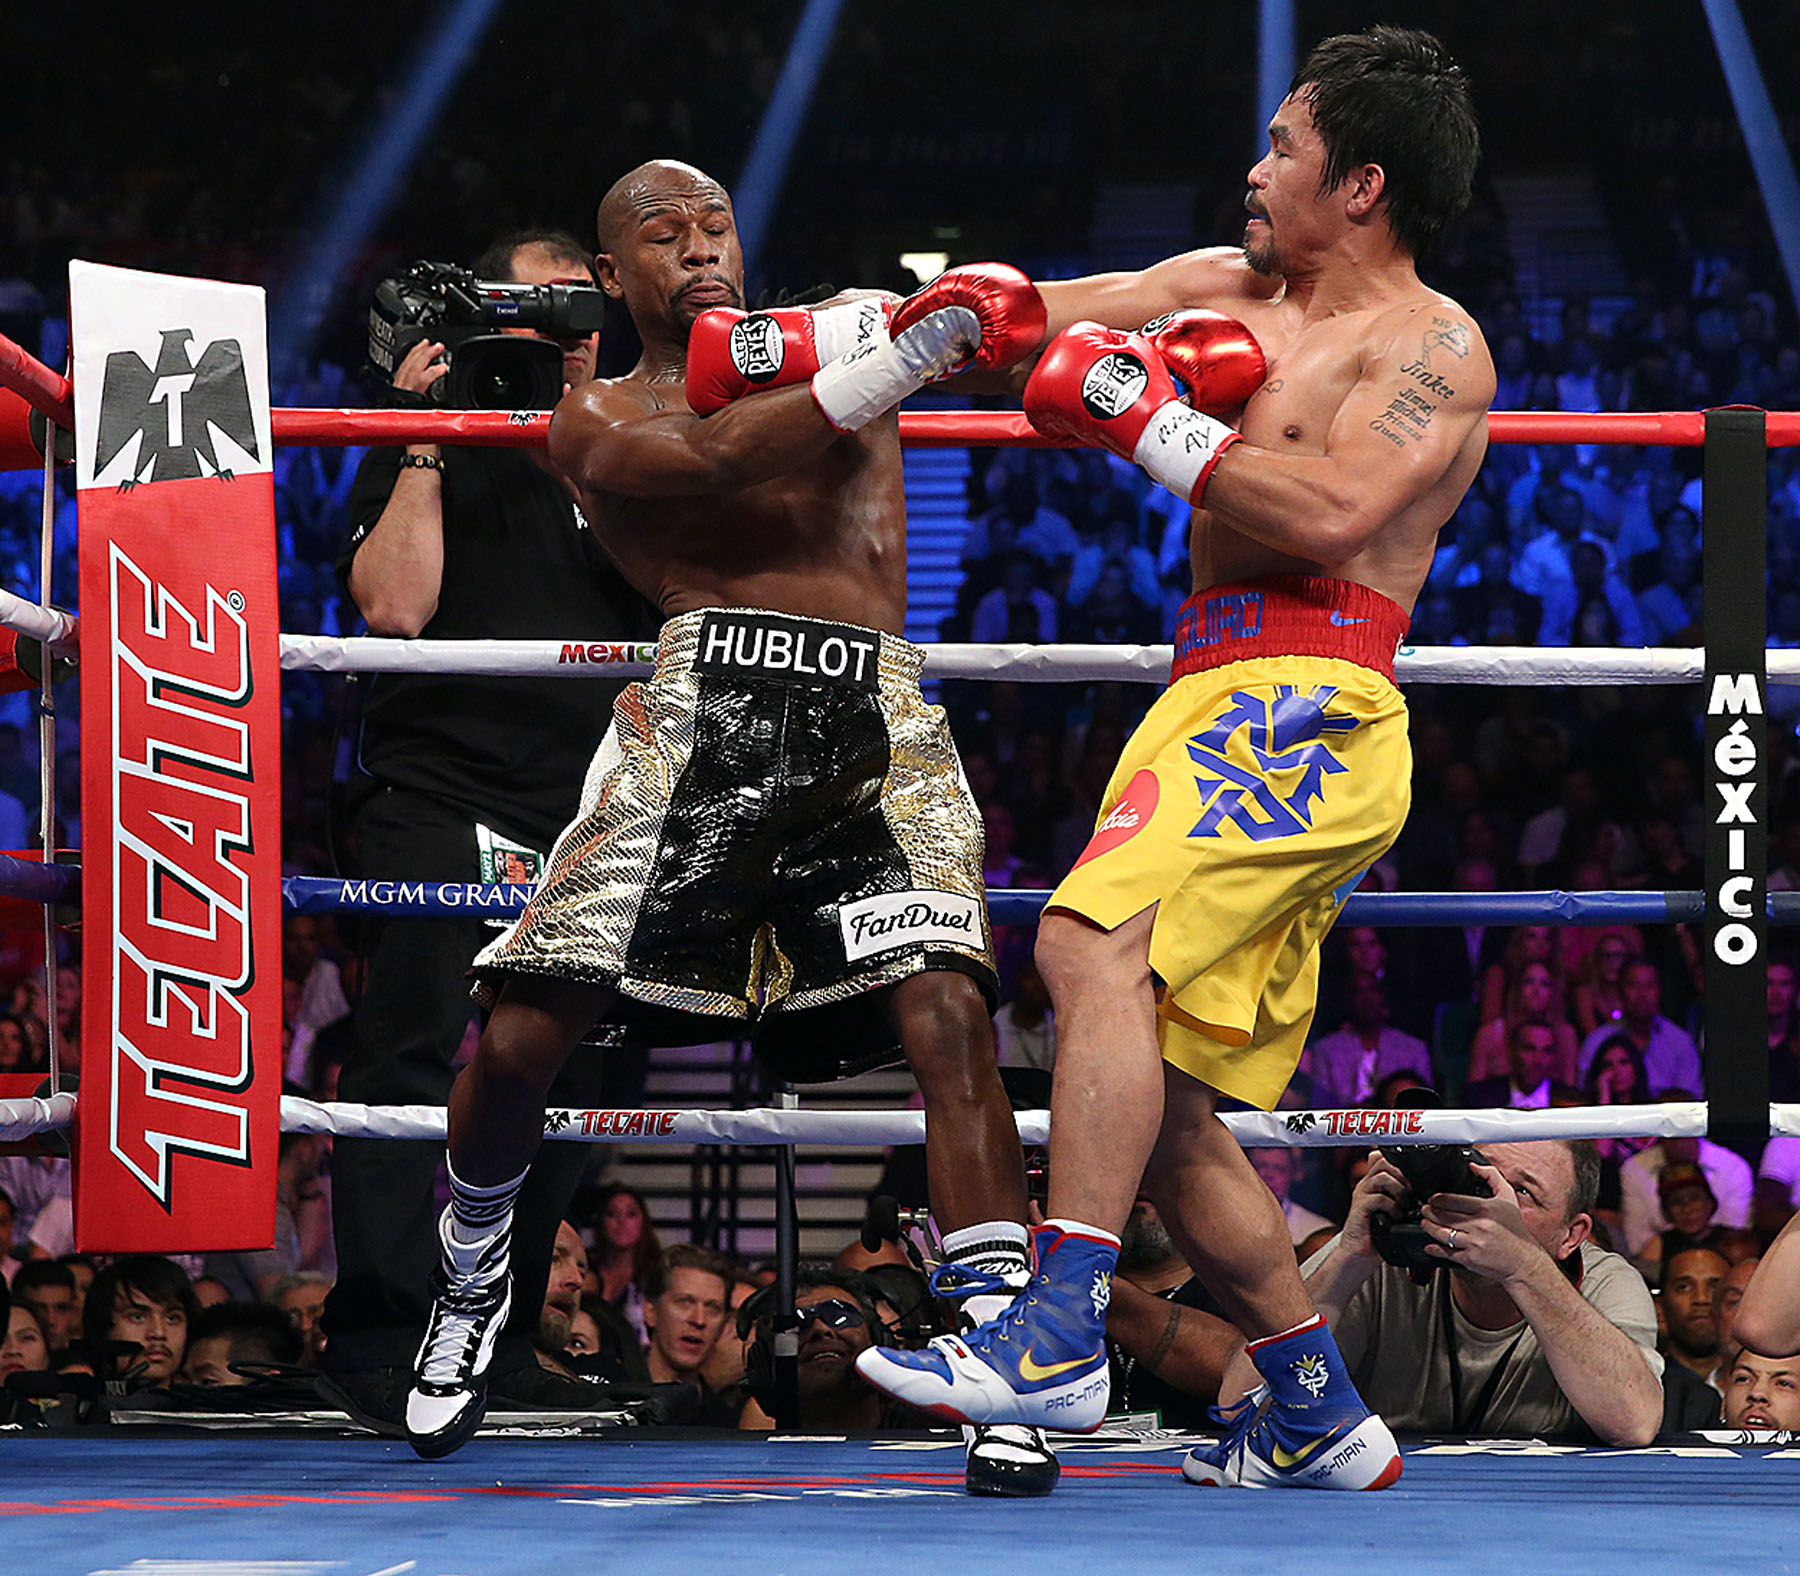 Manny Pacquiao vs Floyd Mayweather: Will It Happen?